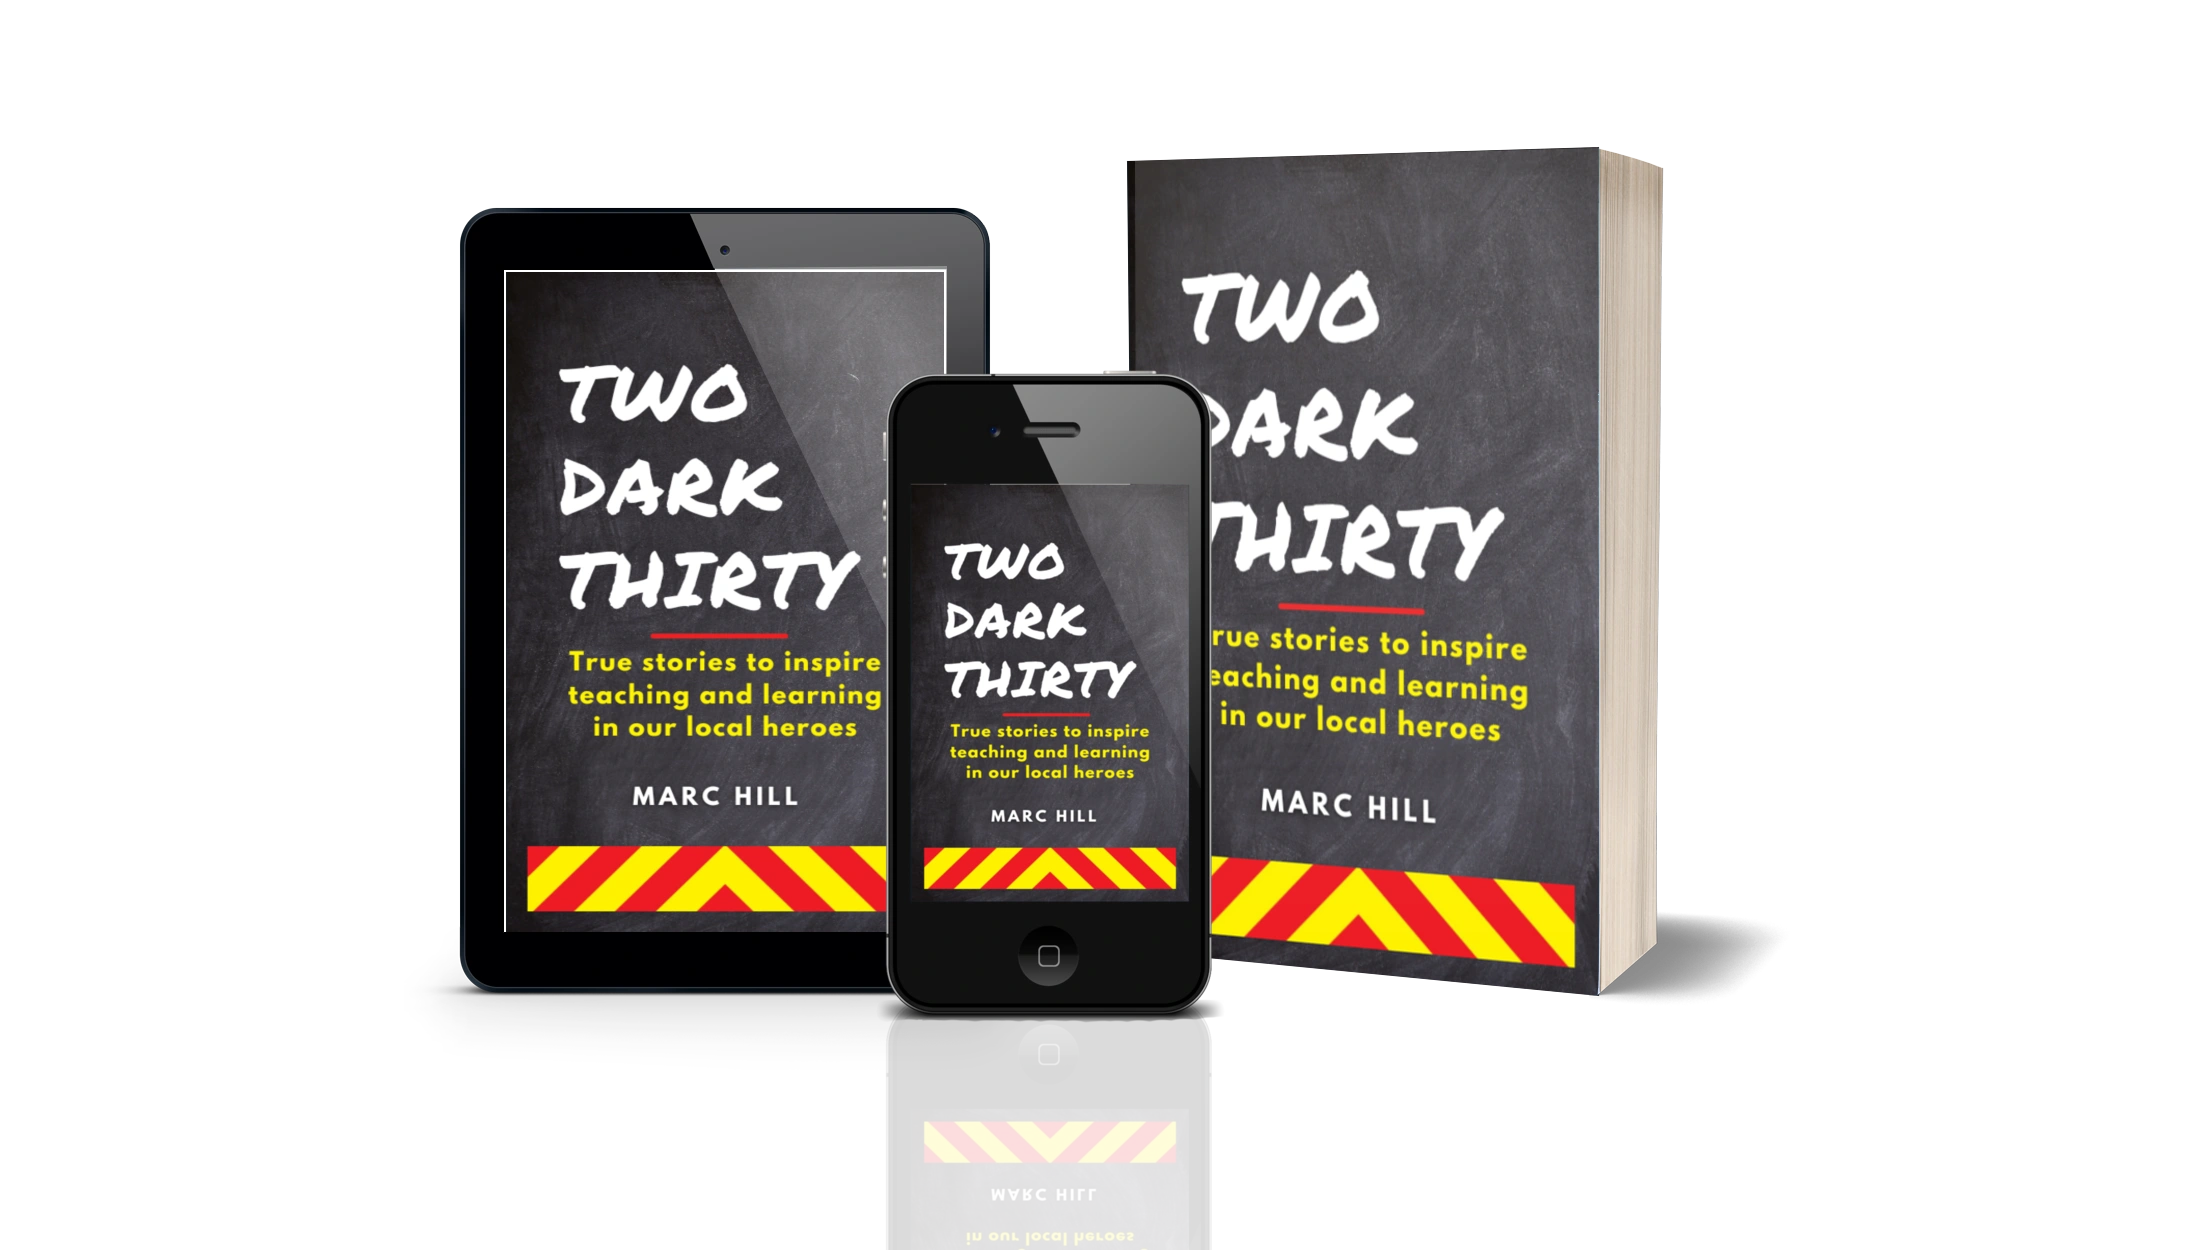 Versions of the book Two Dark Thirty